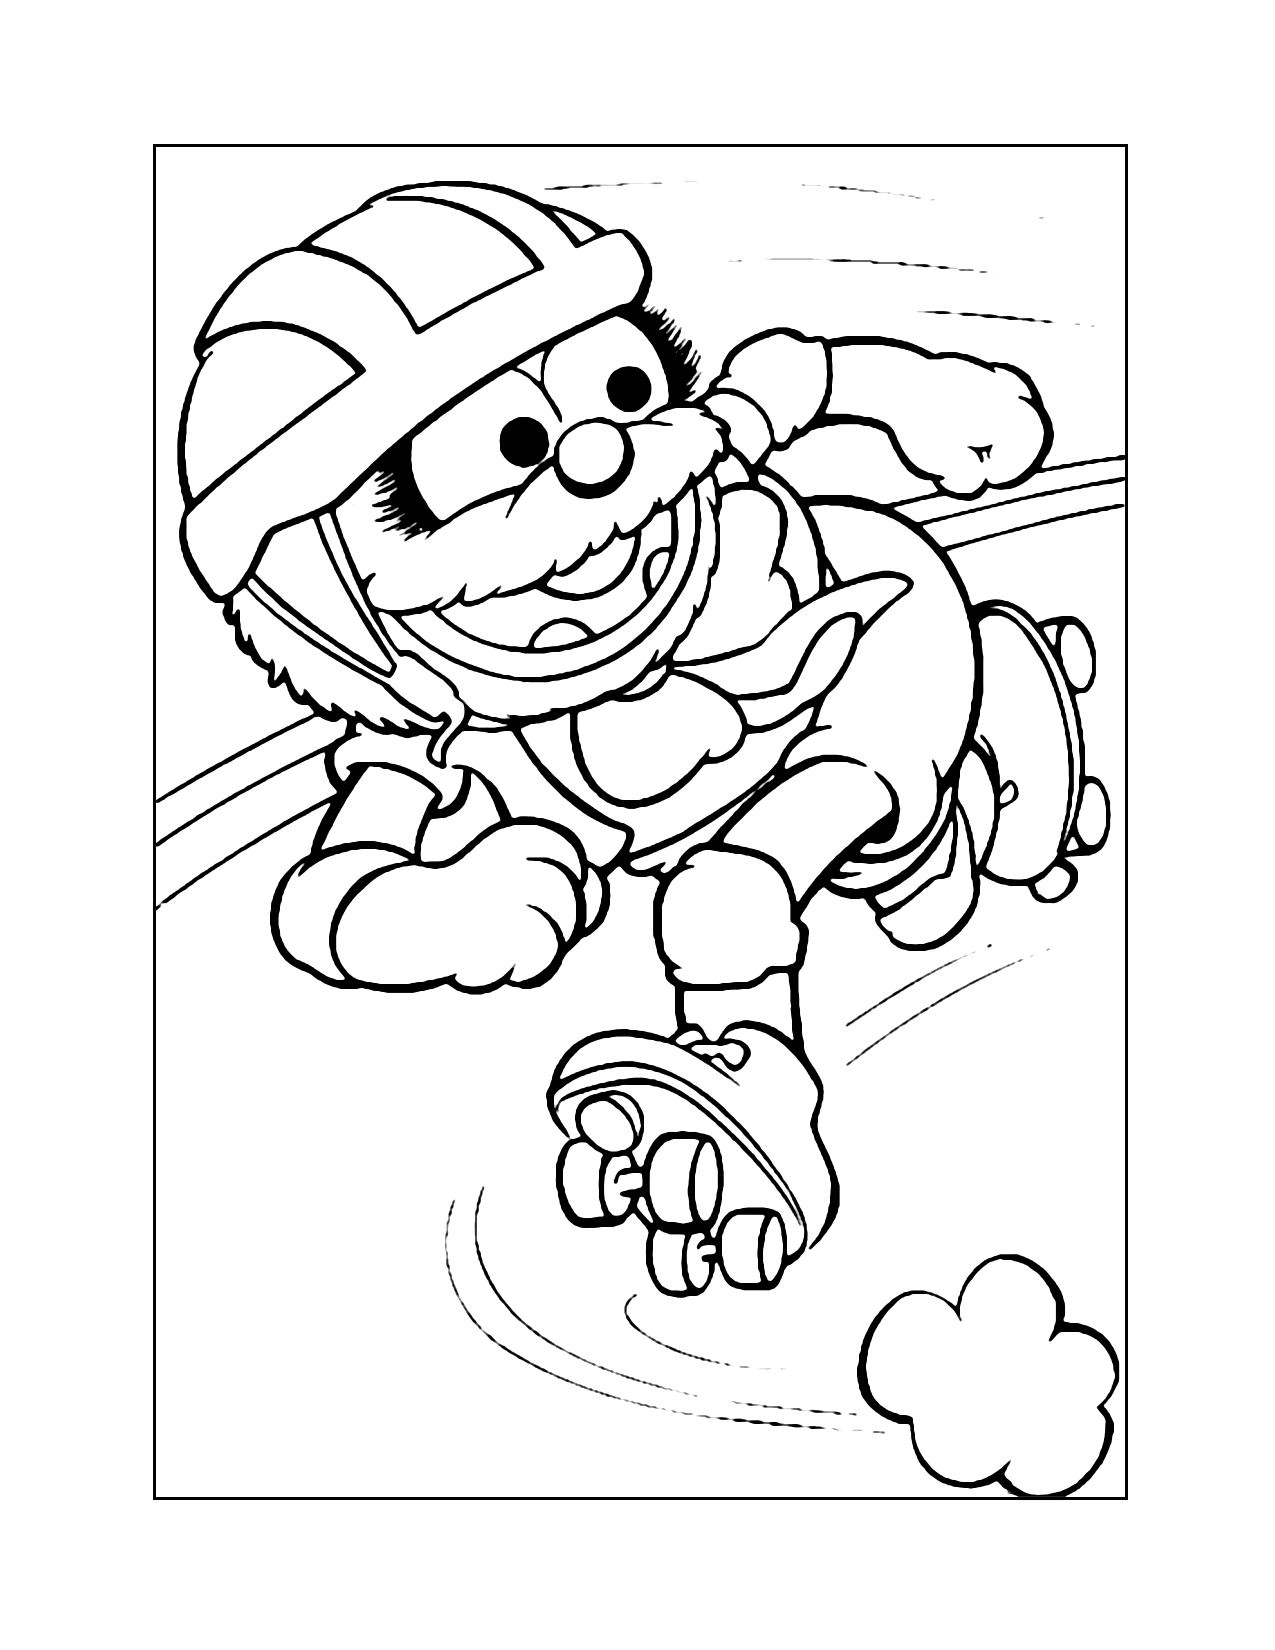 Baby Animal Roller Skating Coloring Page